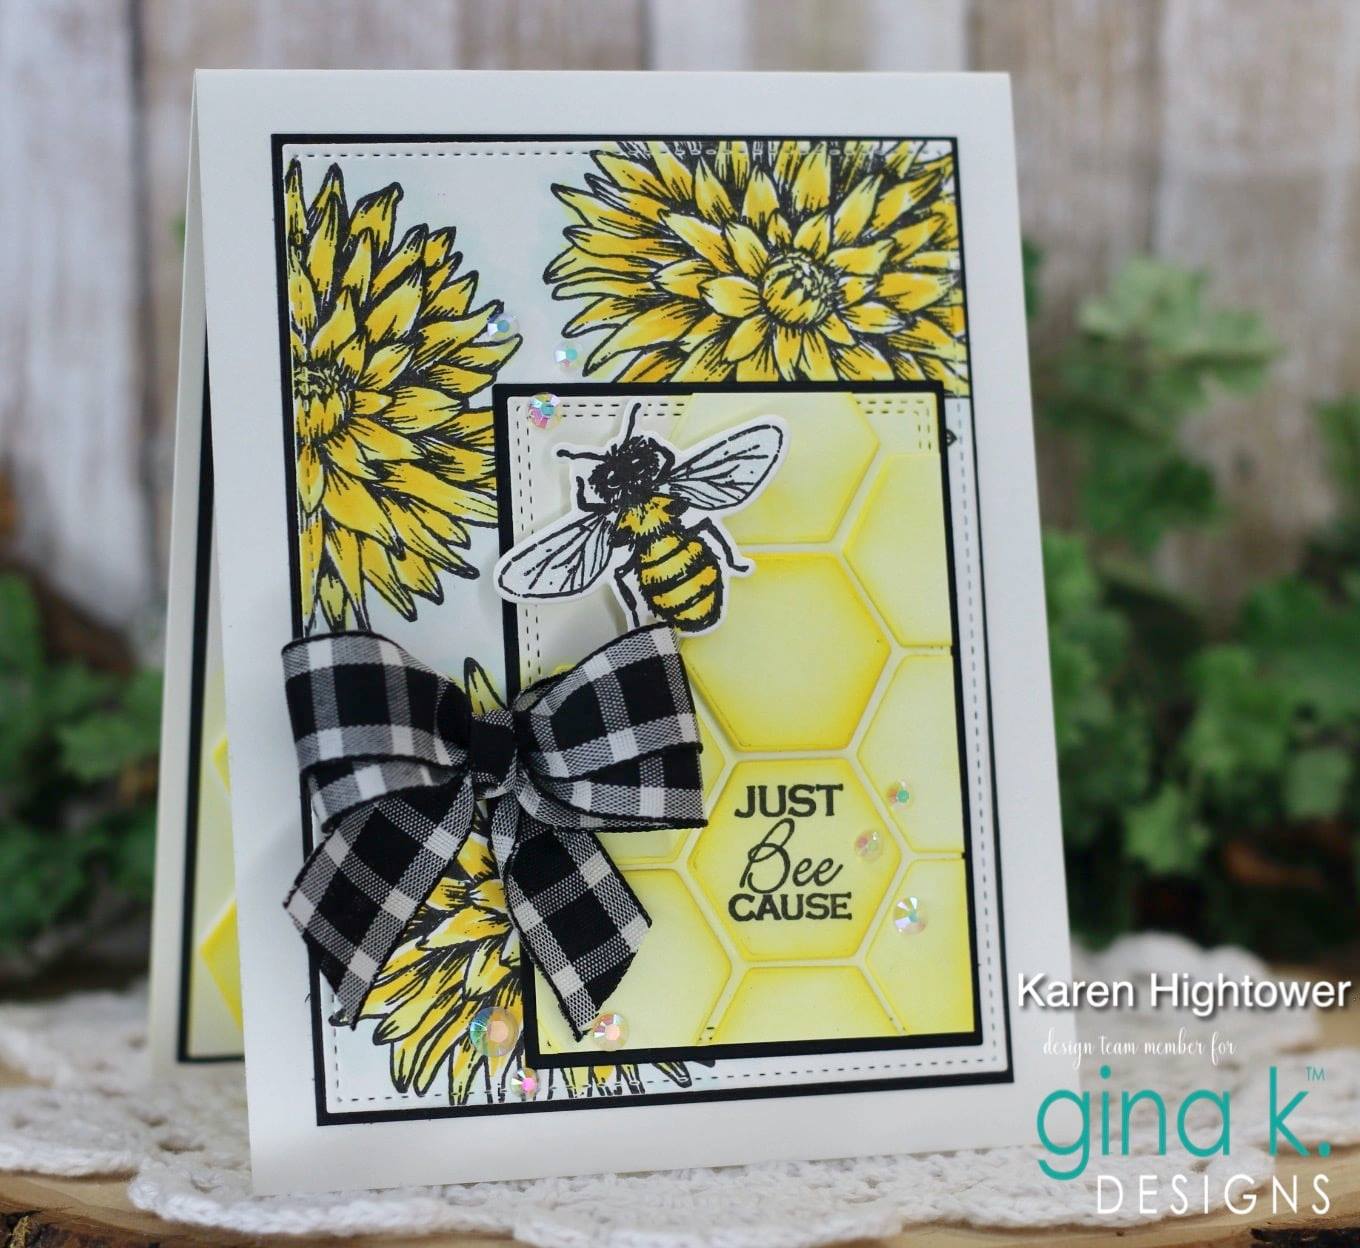 Gina K Designs BEAUTIFUL BEES Clear Stamps 6903